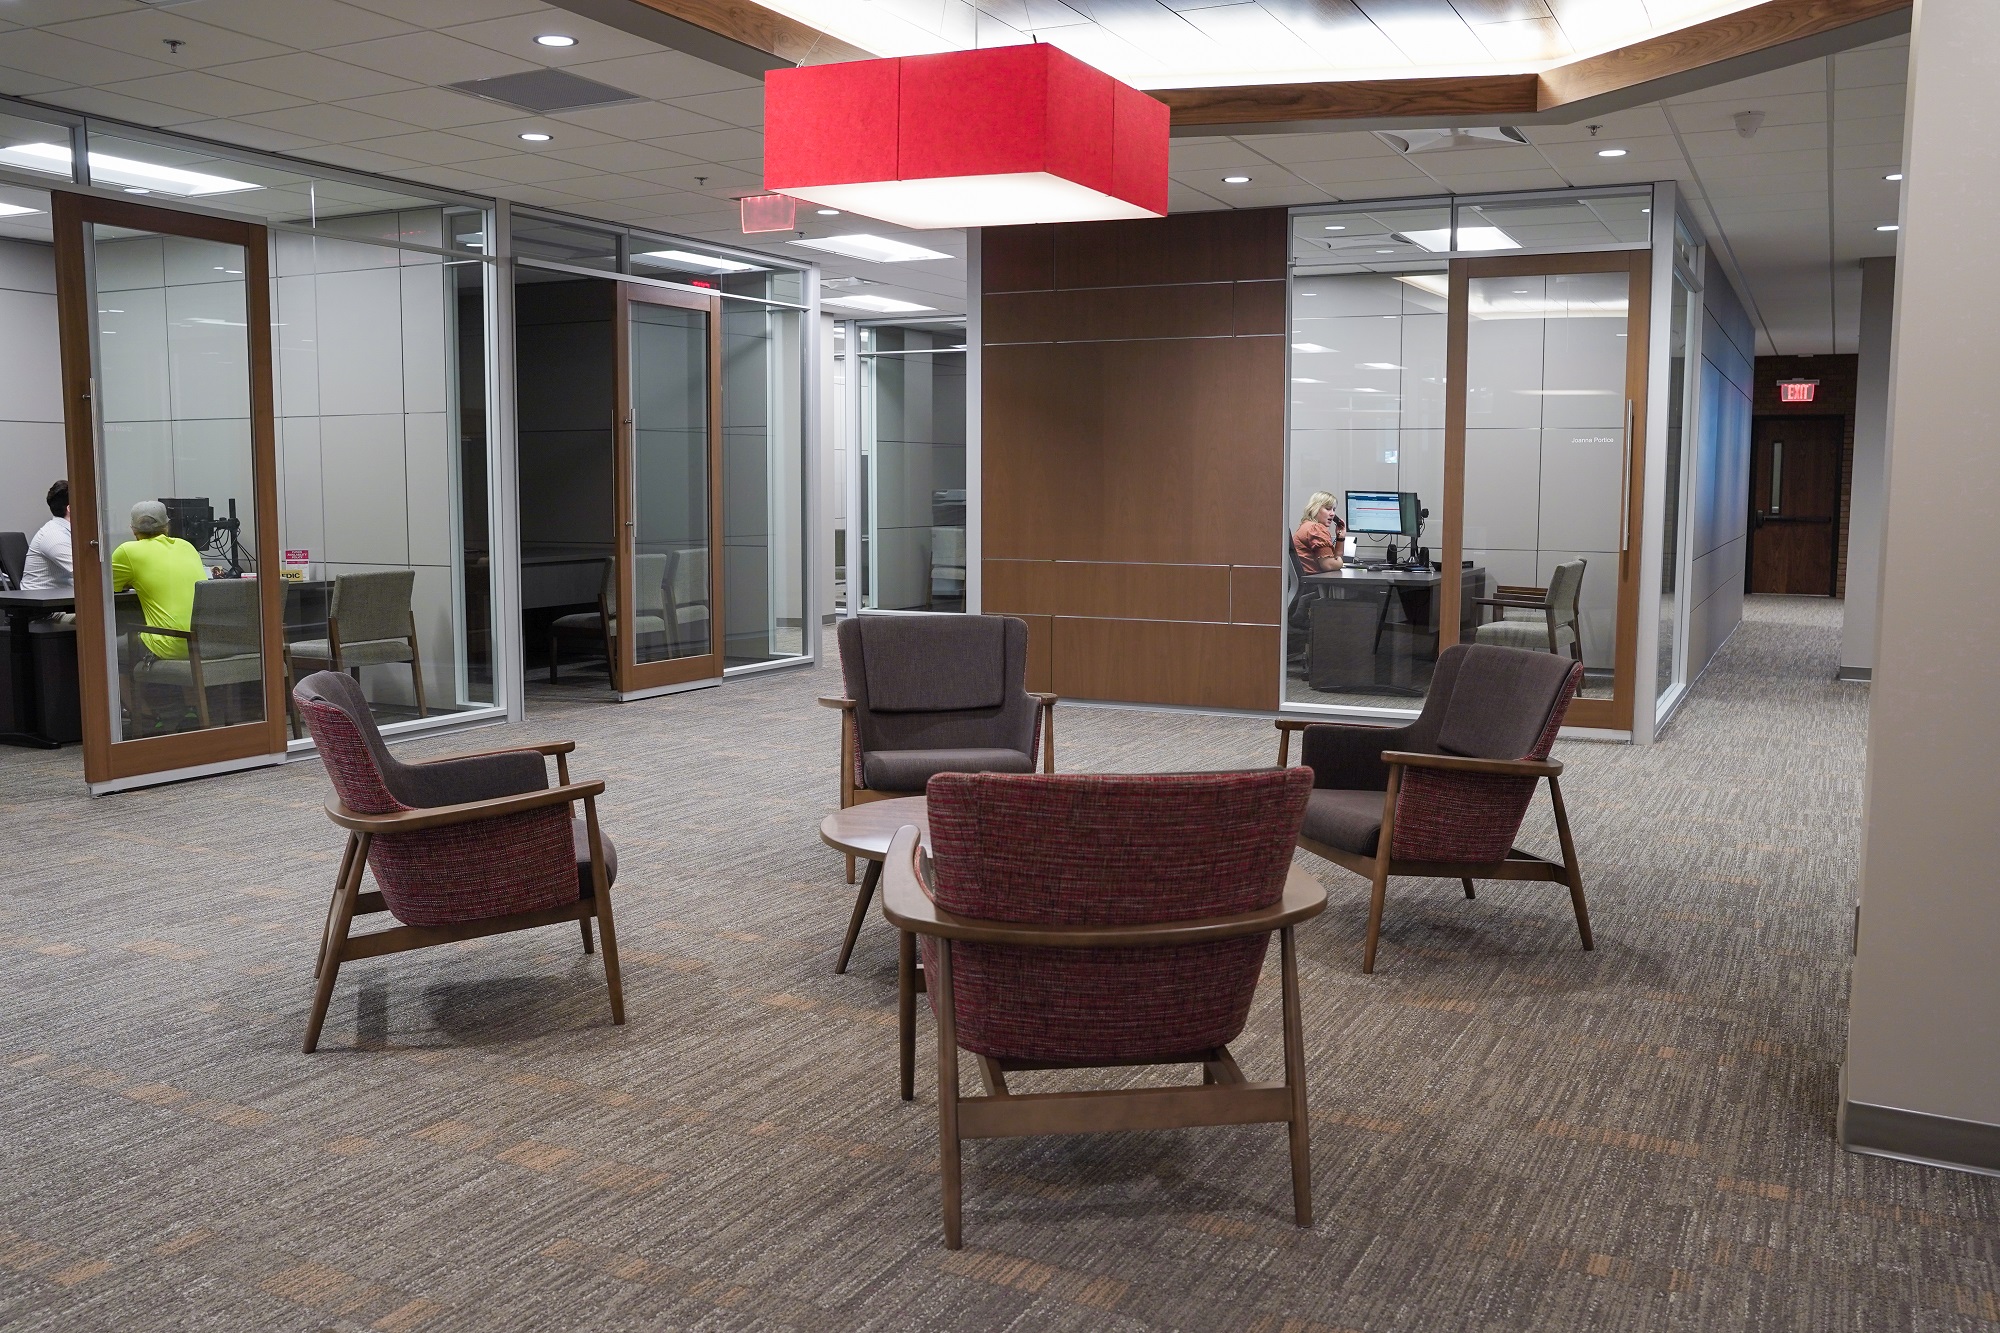 A casual seating area awaits for visitors at First National Bank.